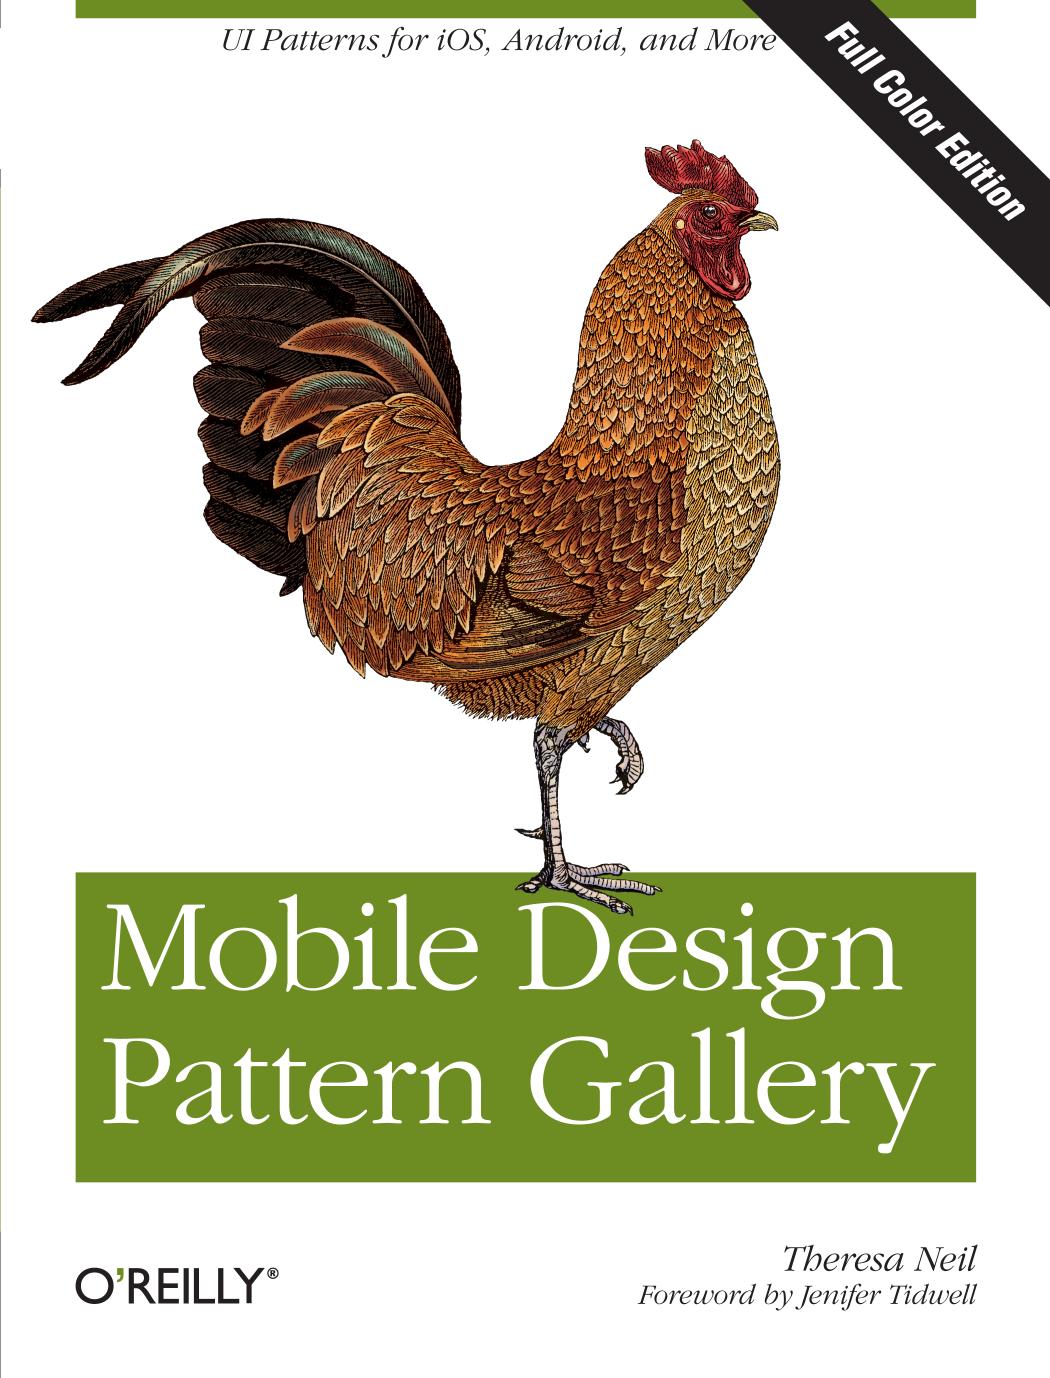 Mobile Design Pattern Gallery by Theresa Neil